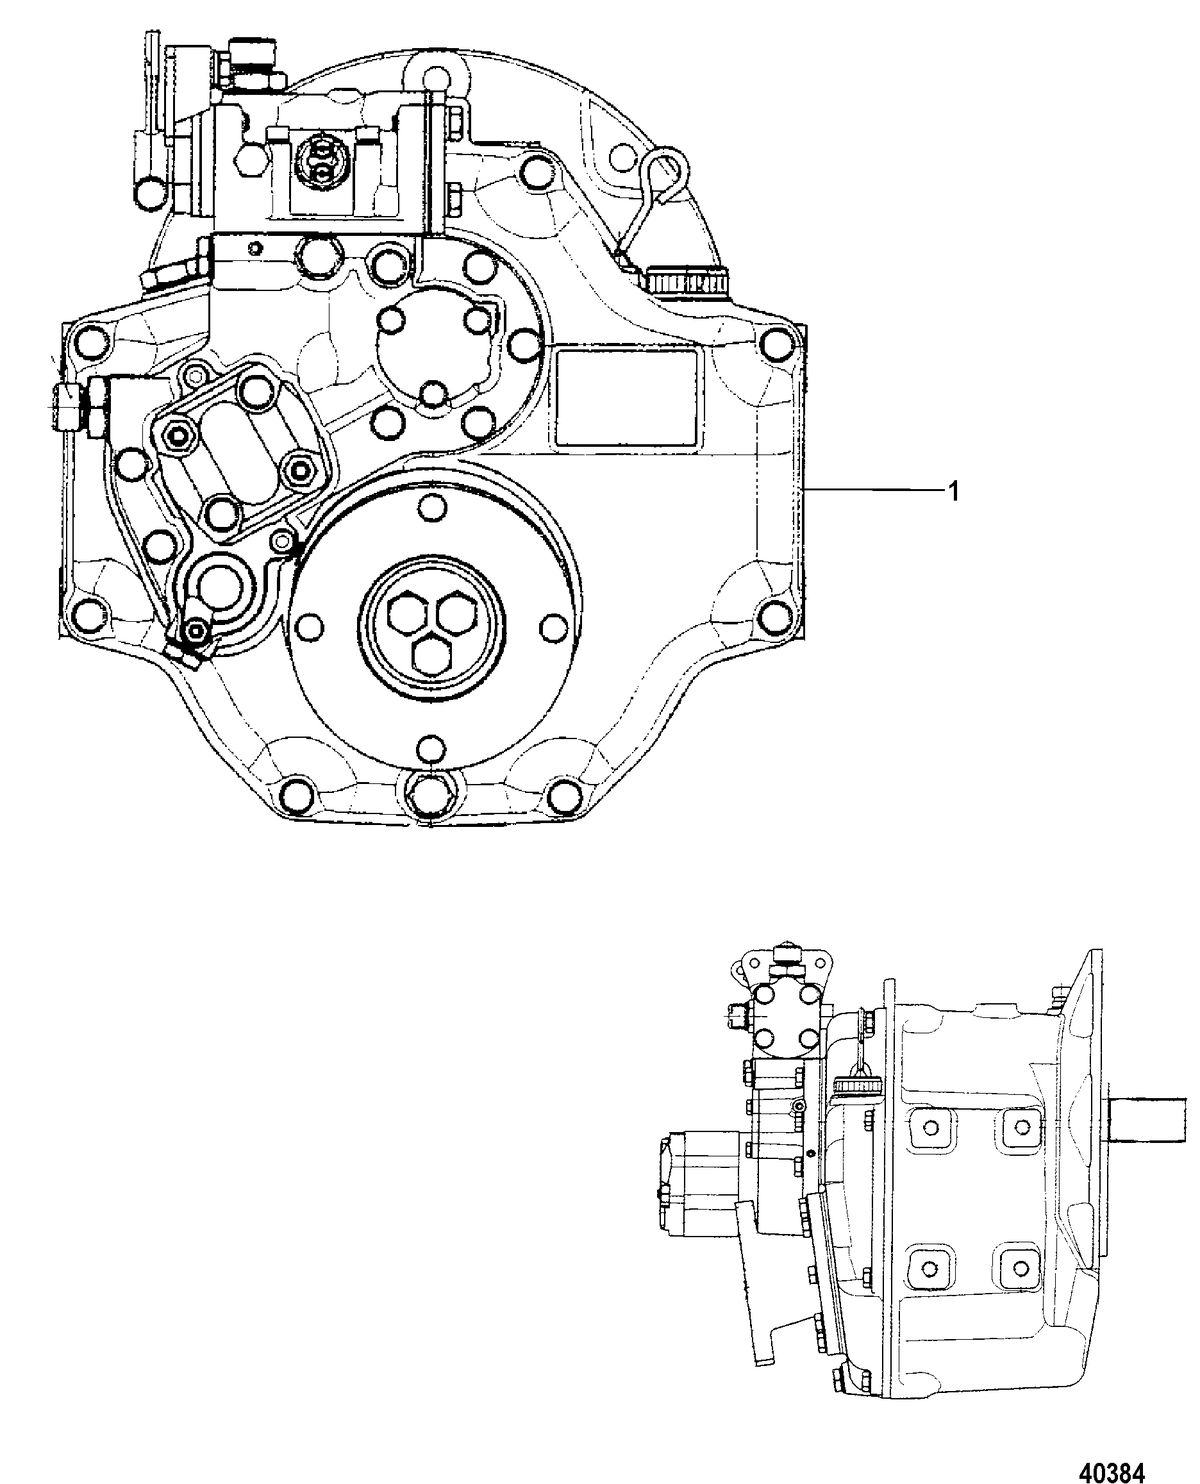 MERCRUISER 2.0L I4 115-130HP DIESEL Transmission and Related Parts (Inboard), Technodrive 485